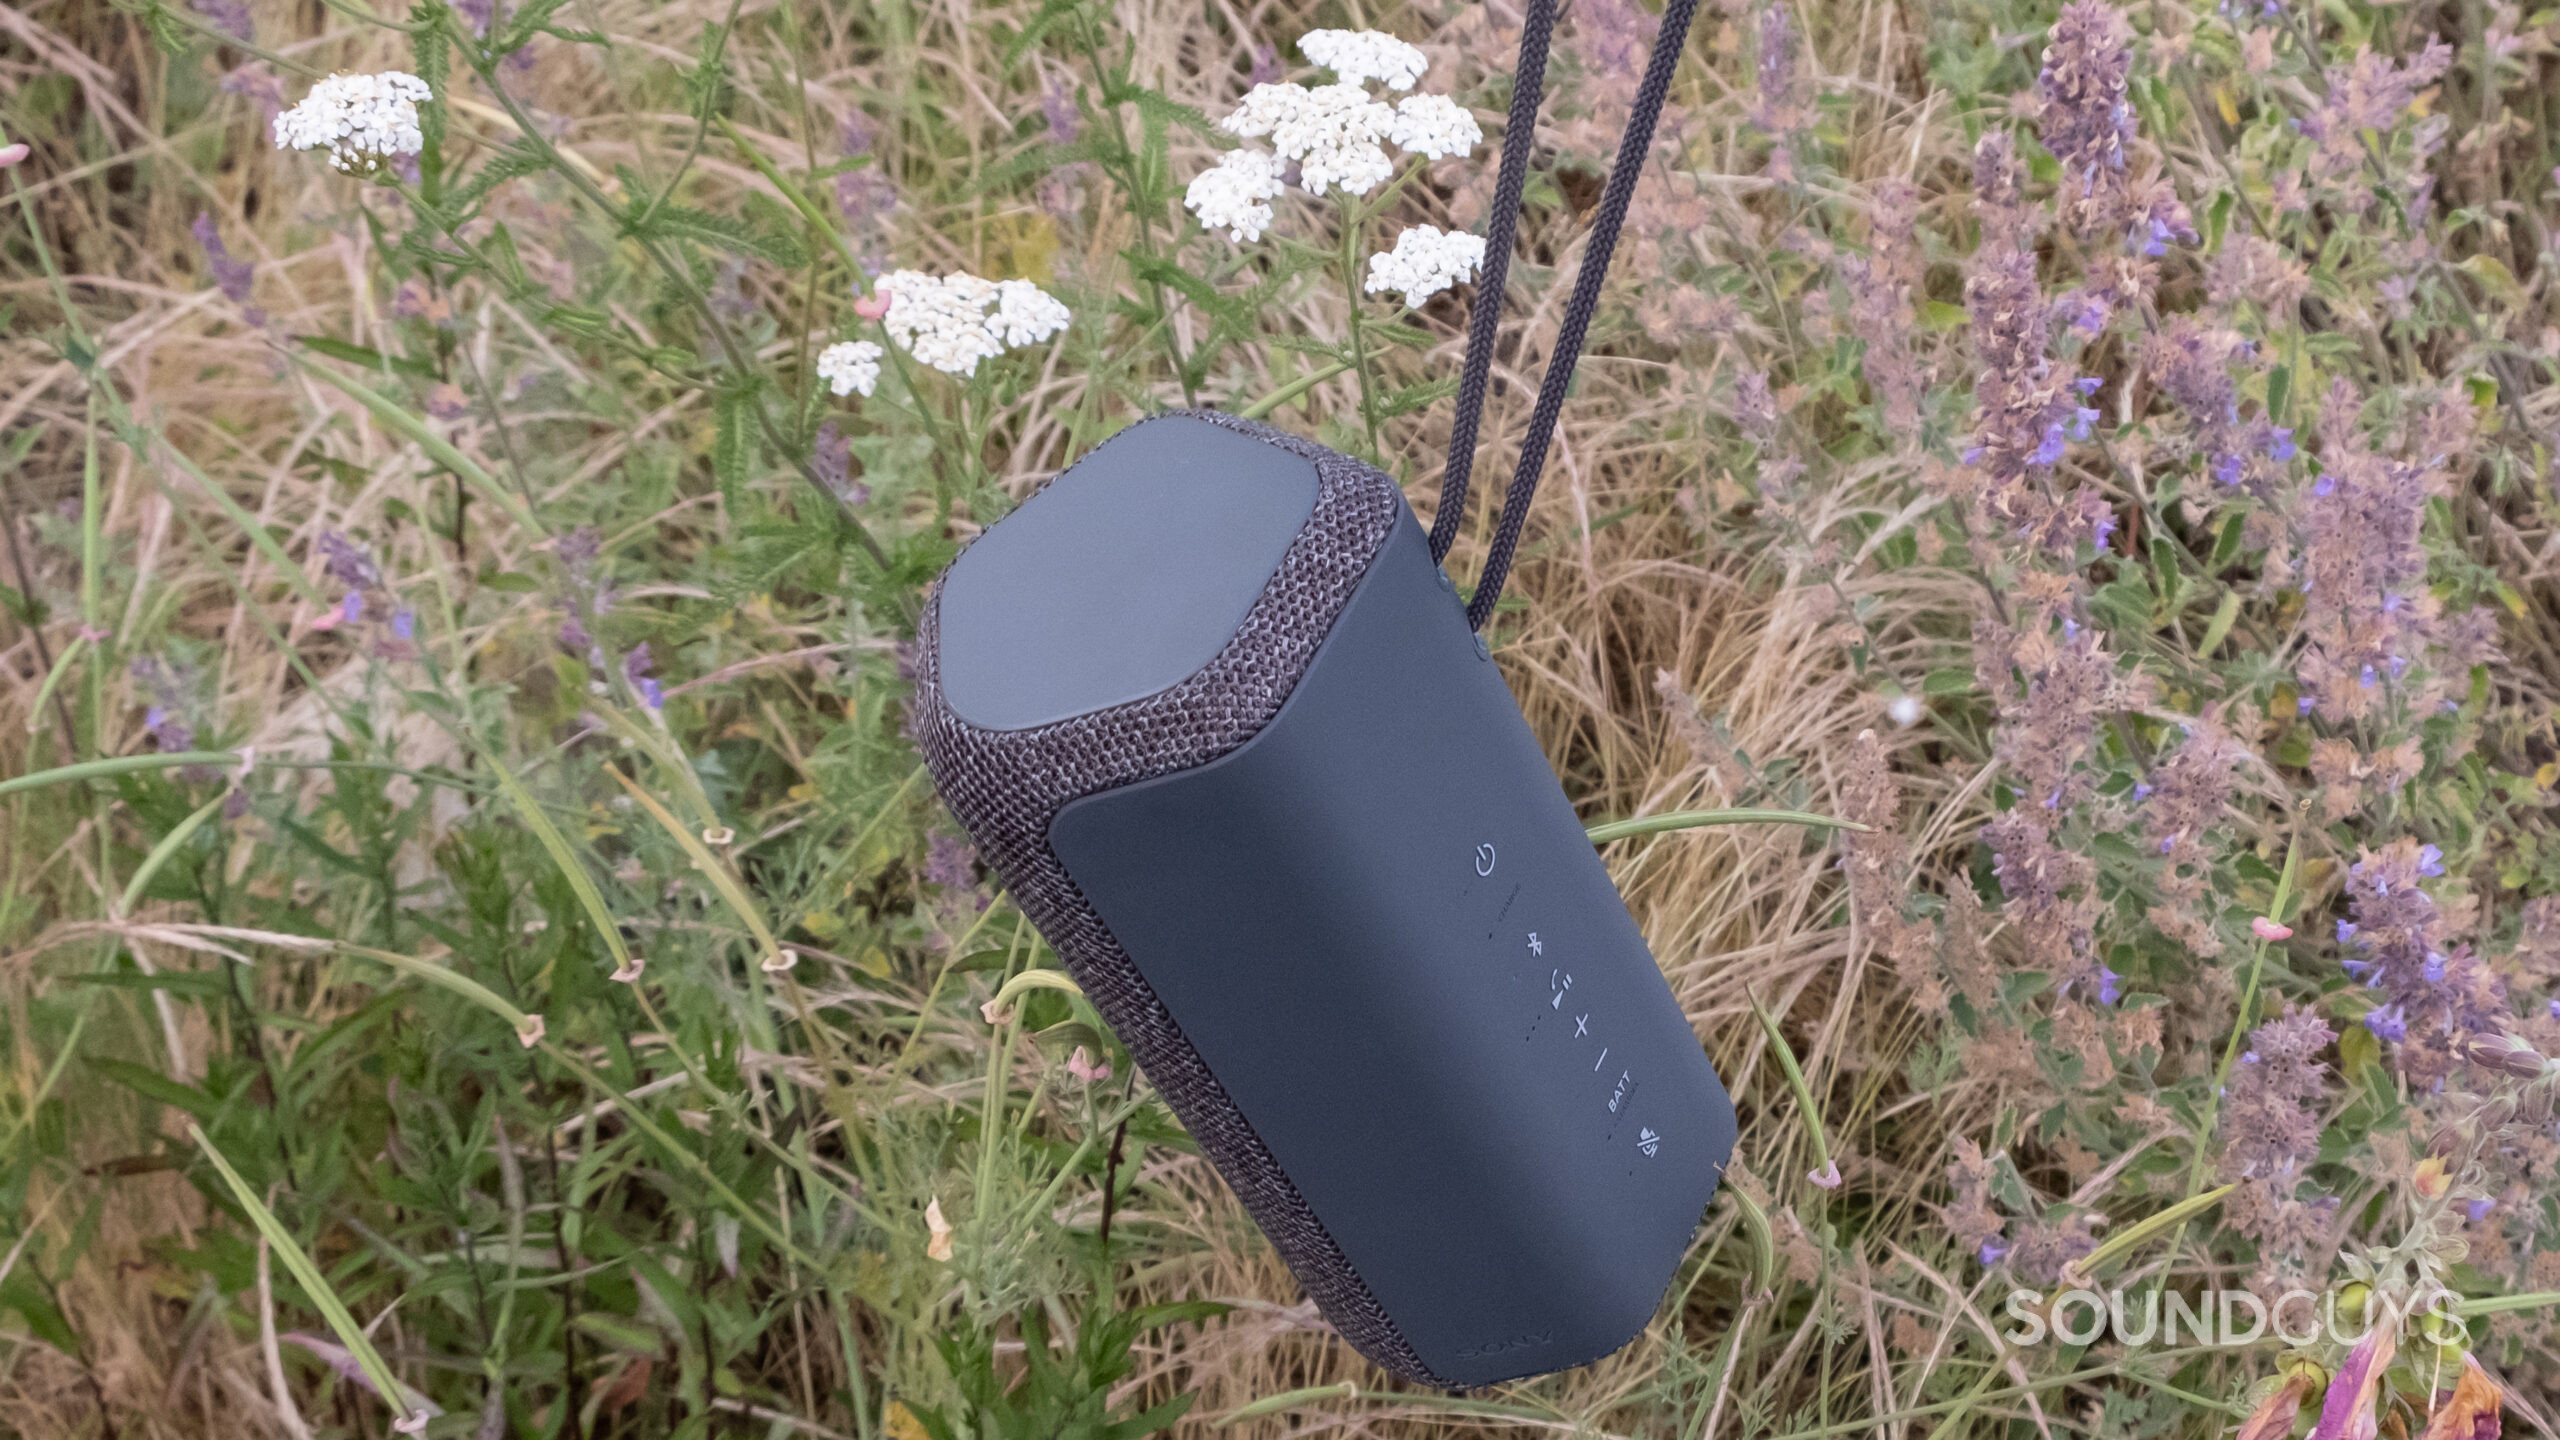 The Sony SRS-XE200 dangles by its cord in front of a wild garden